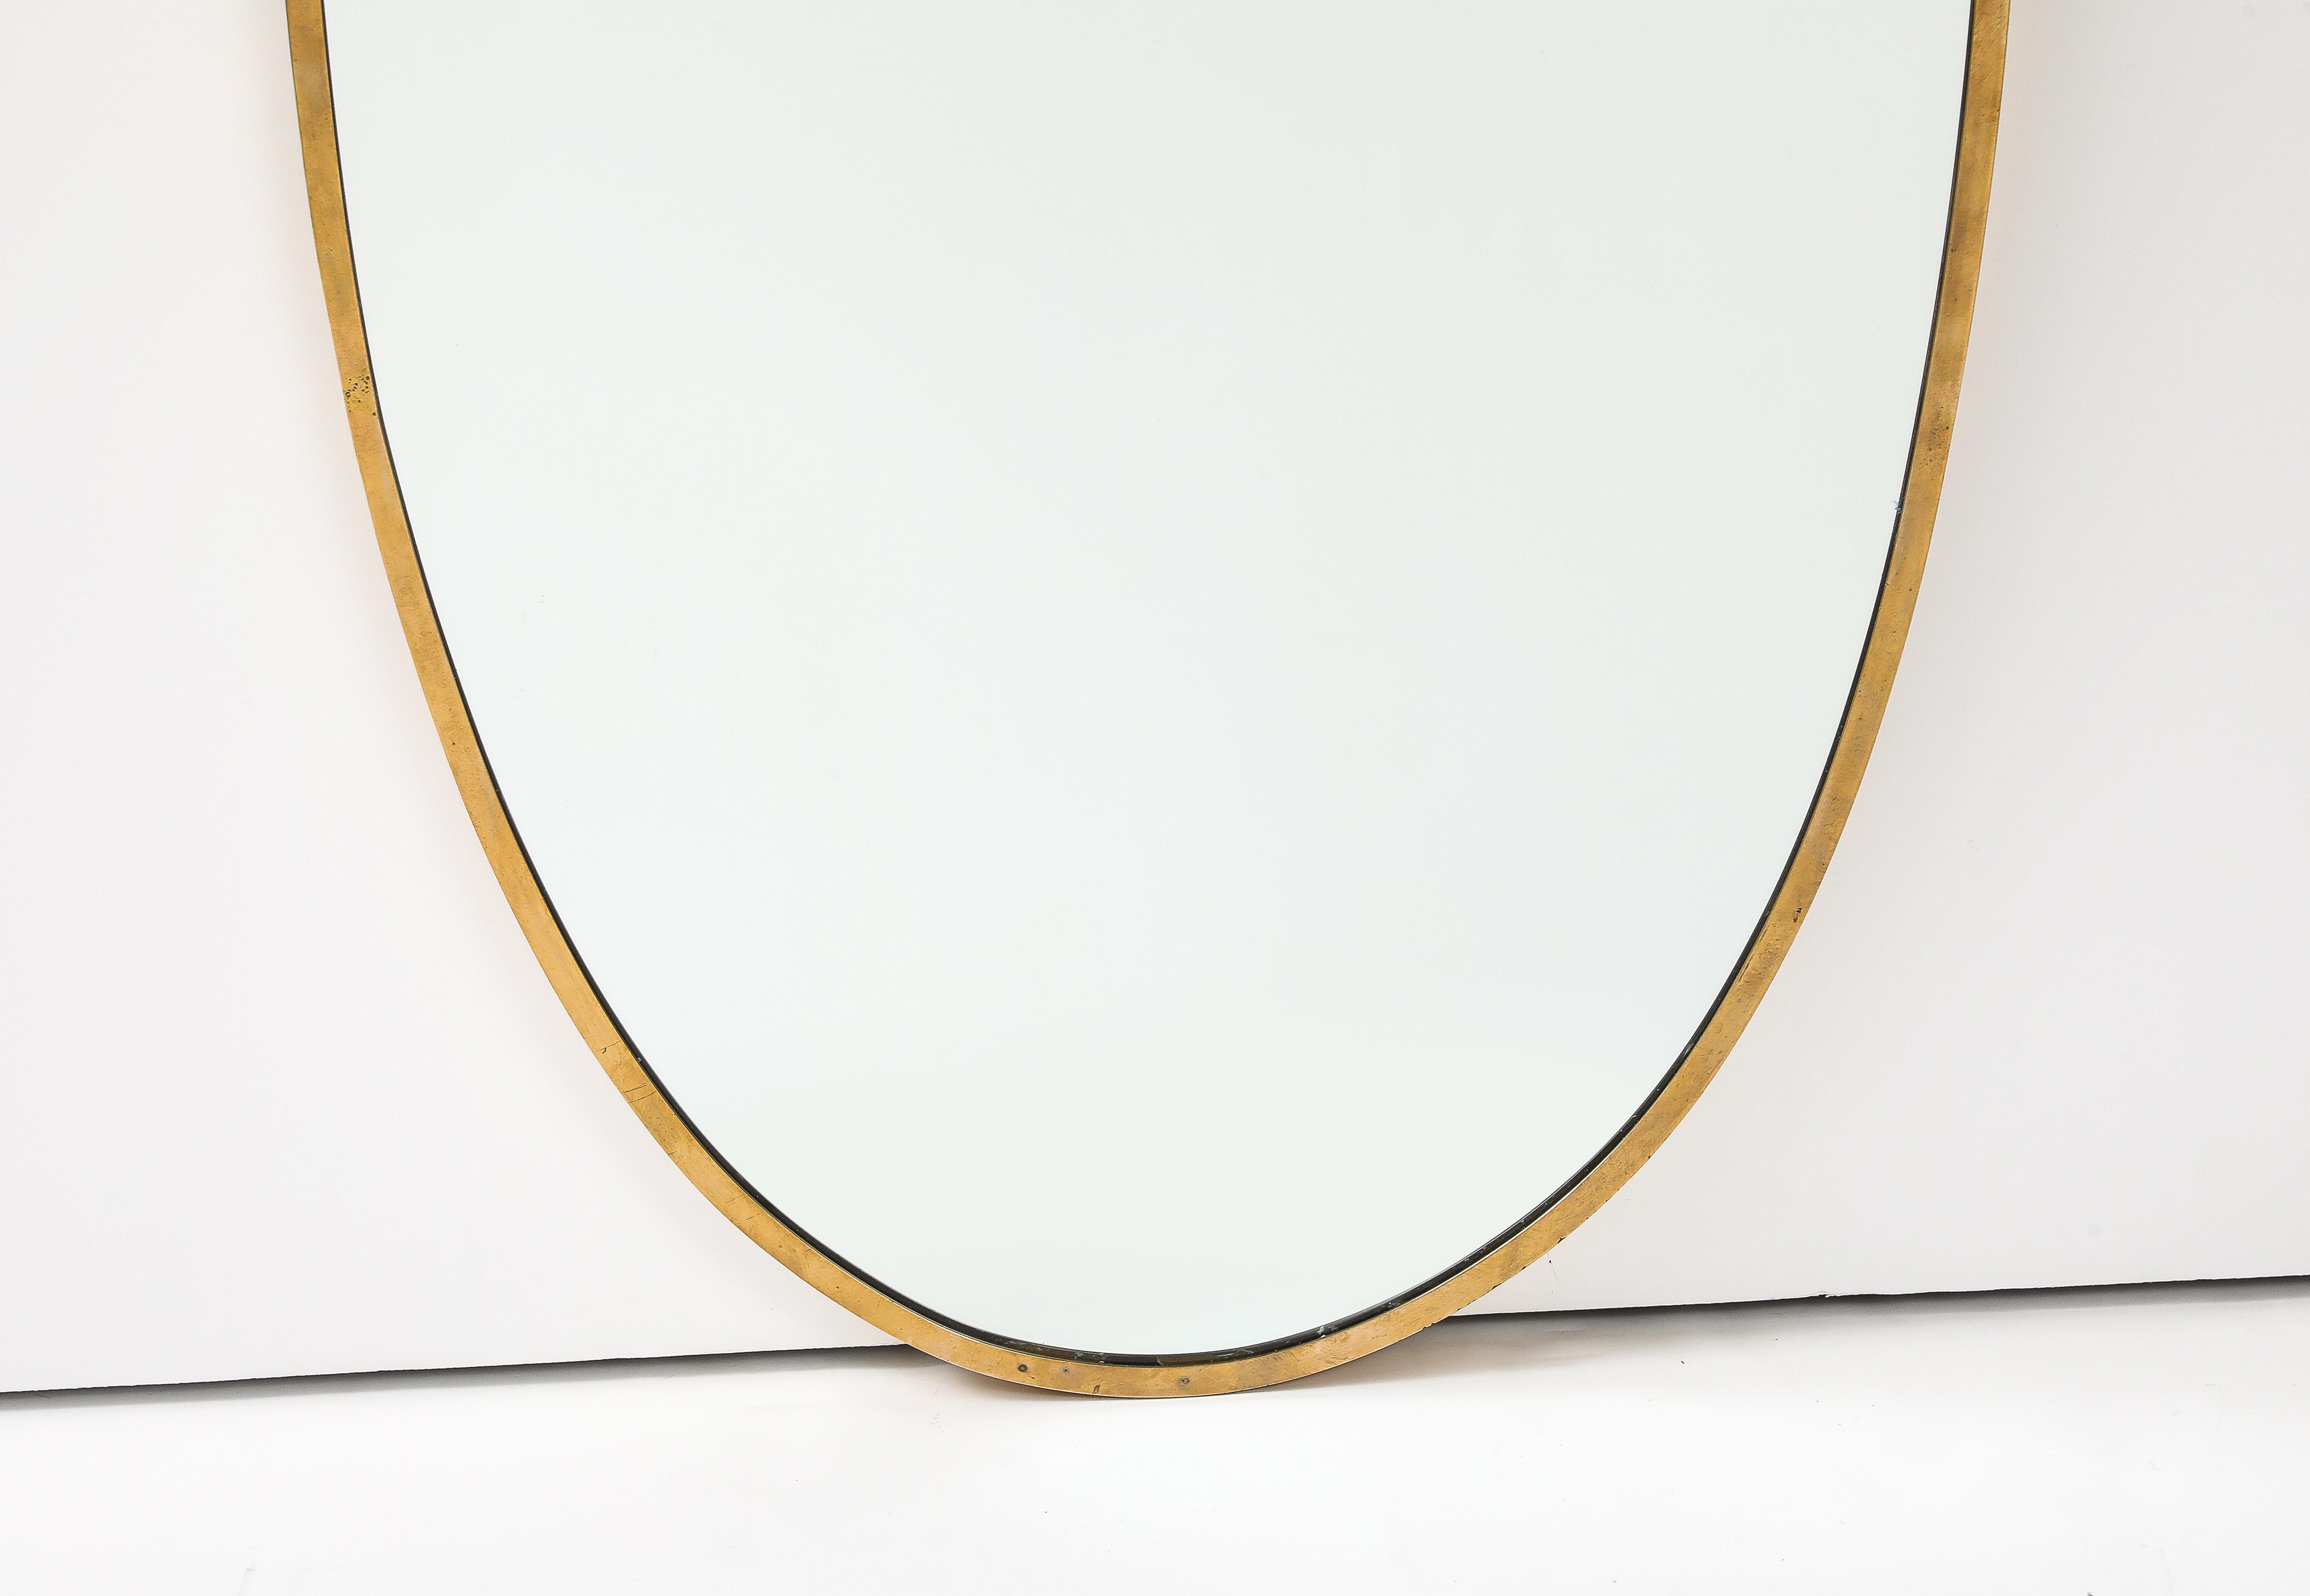 Italian Modernist Mirror with Brass Frame, Italy, c. 1950 For Sale 2